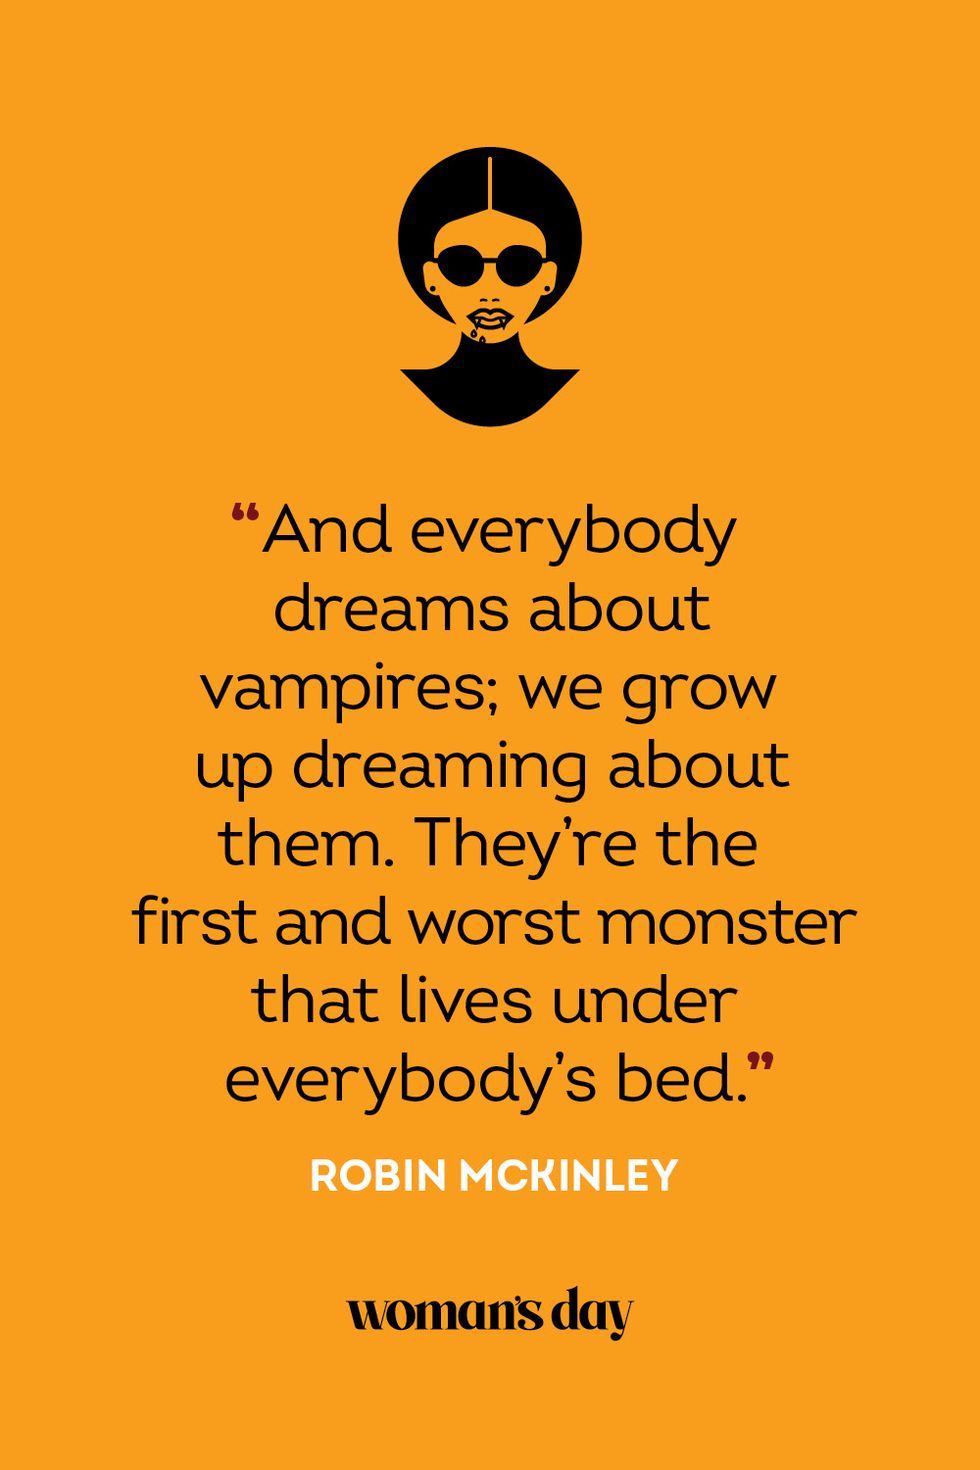 20 Best Vampire Quotes - Quotes About Vampires for Halloween